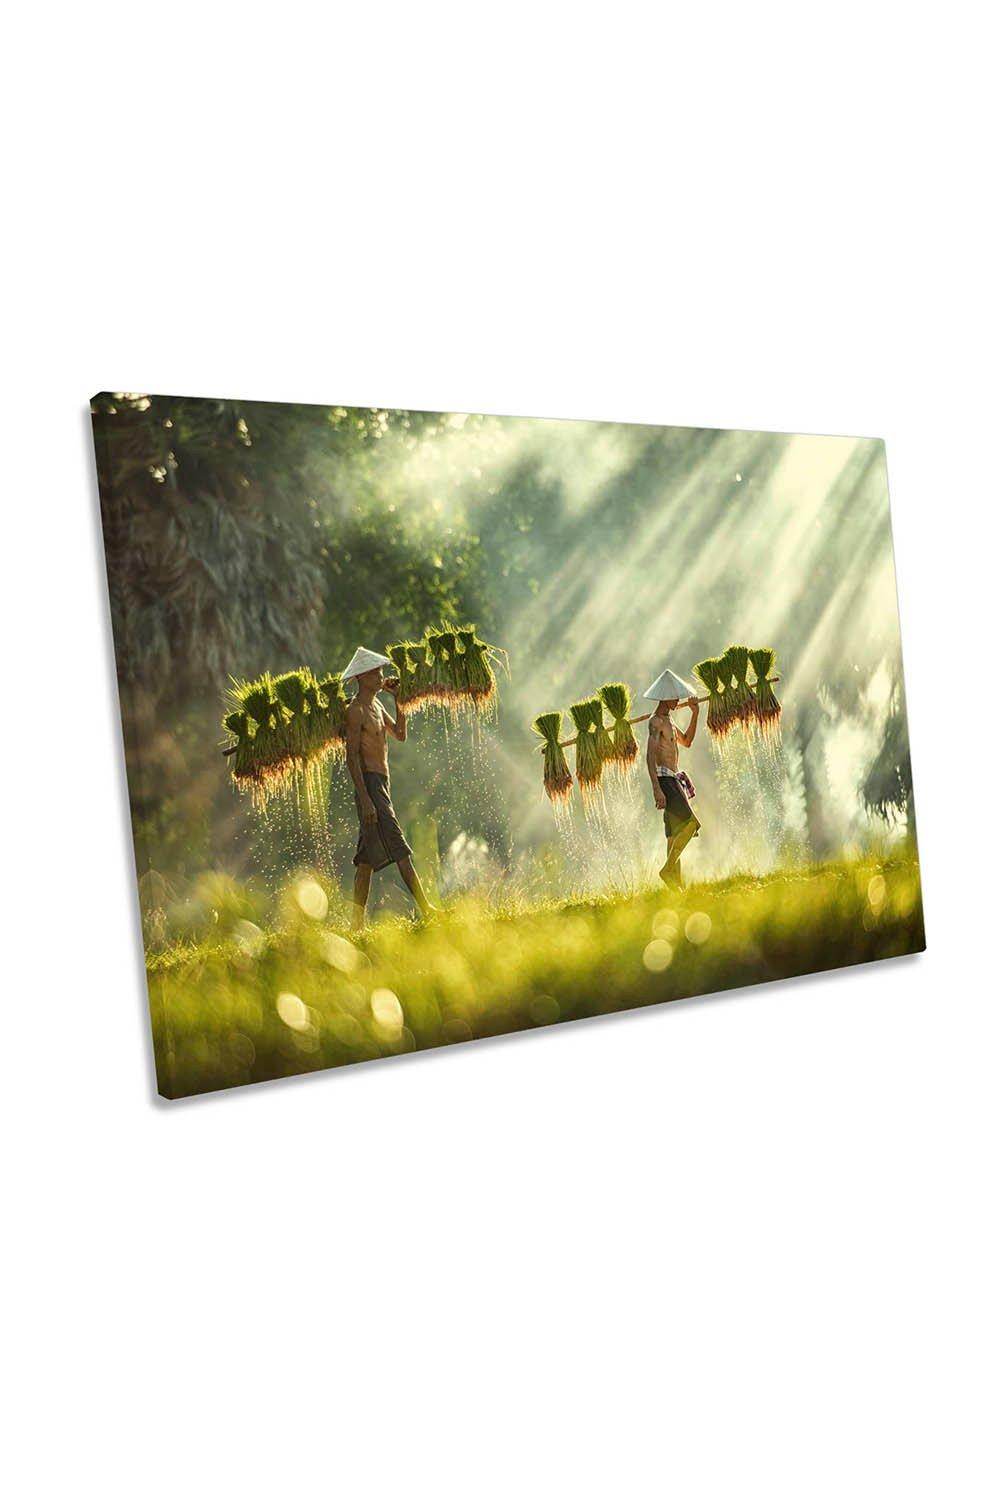 Thailand Rice Farmers Traditional Canvas Wall Art Picture Print